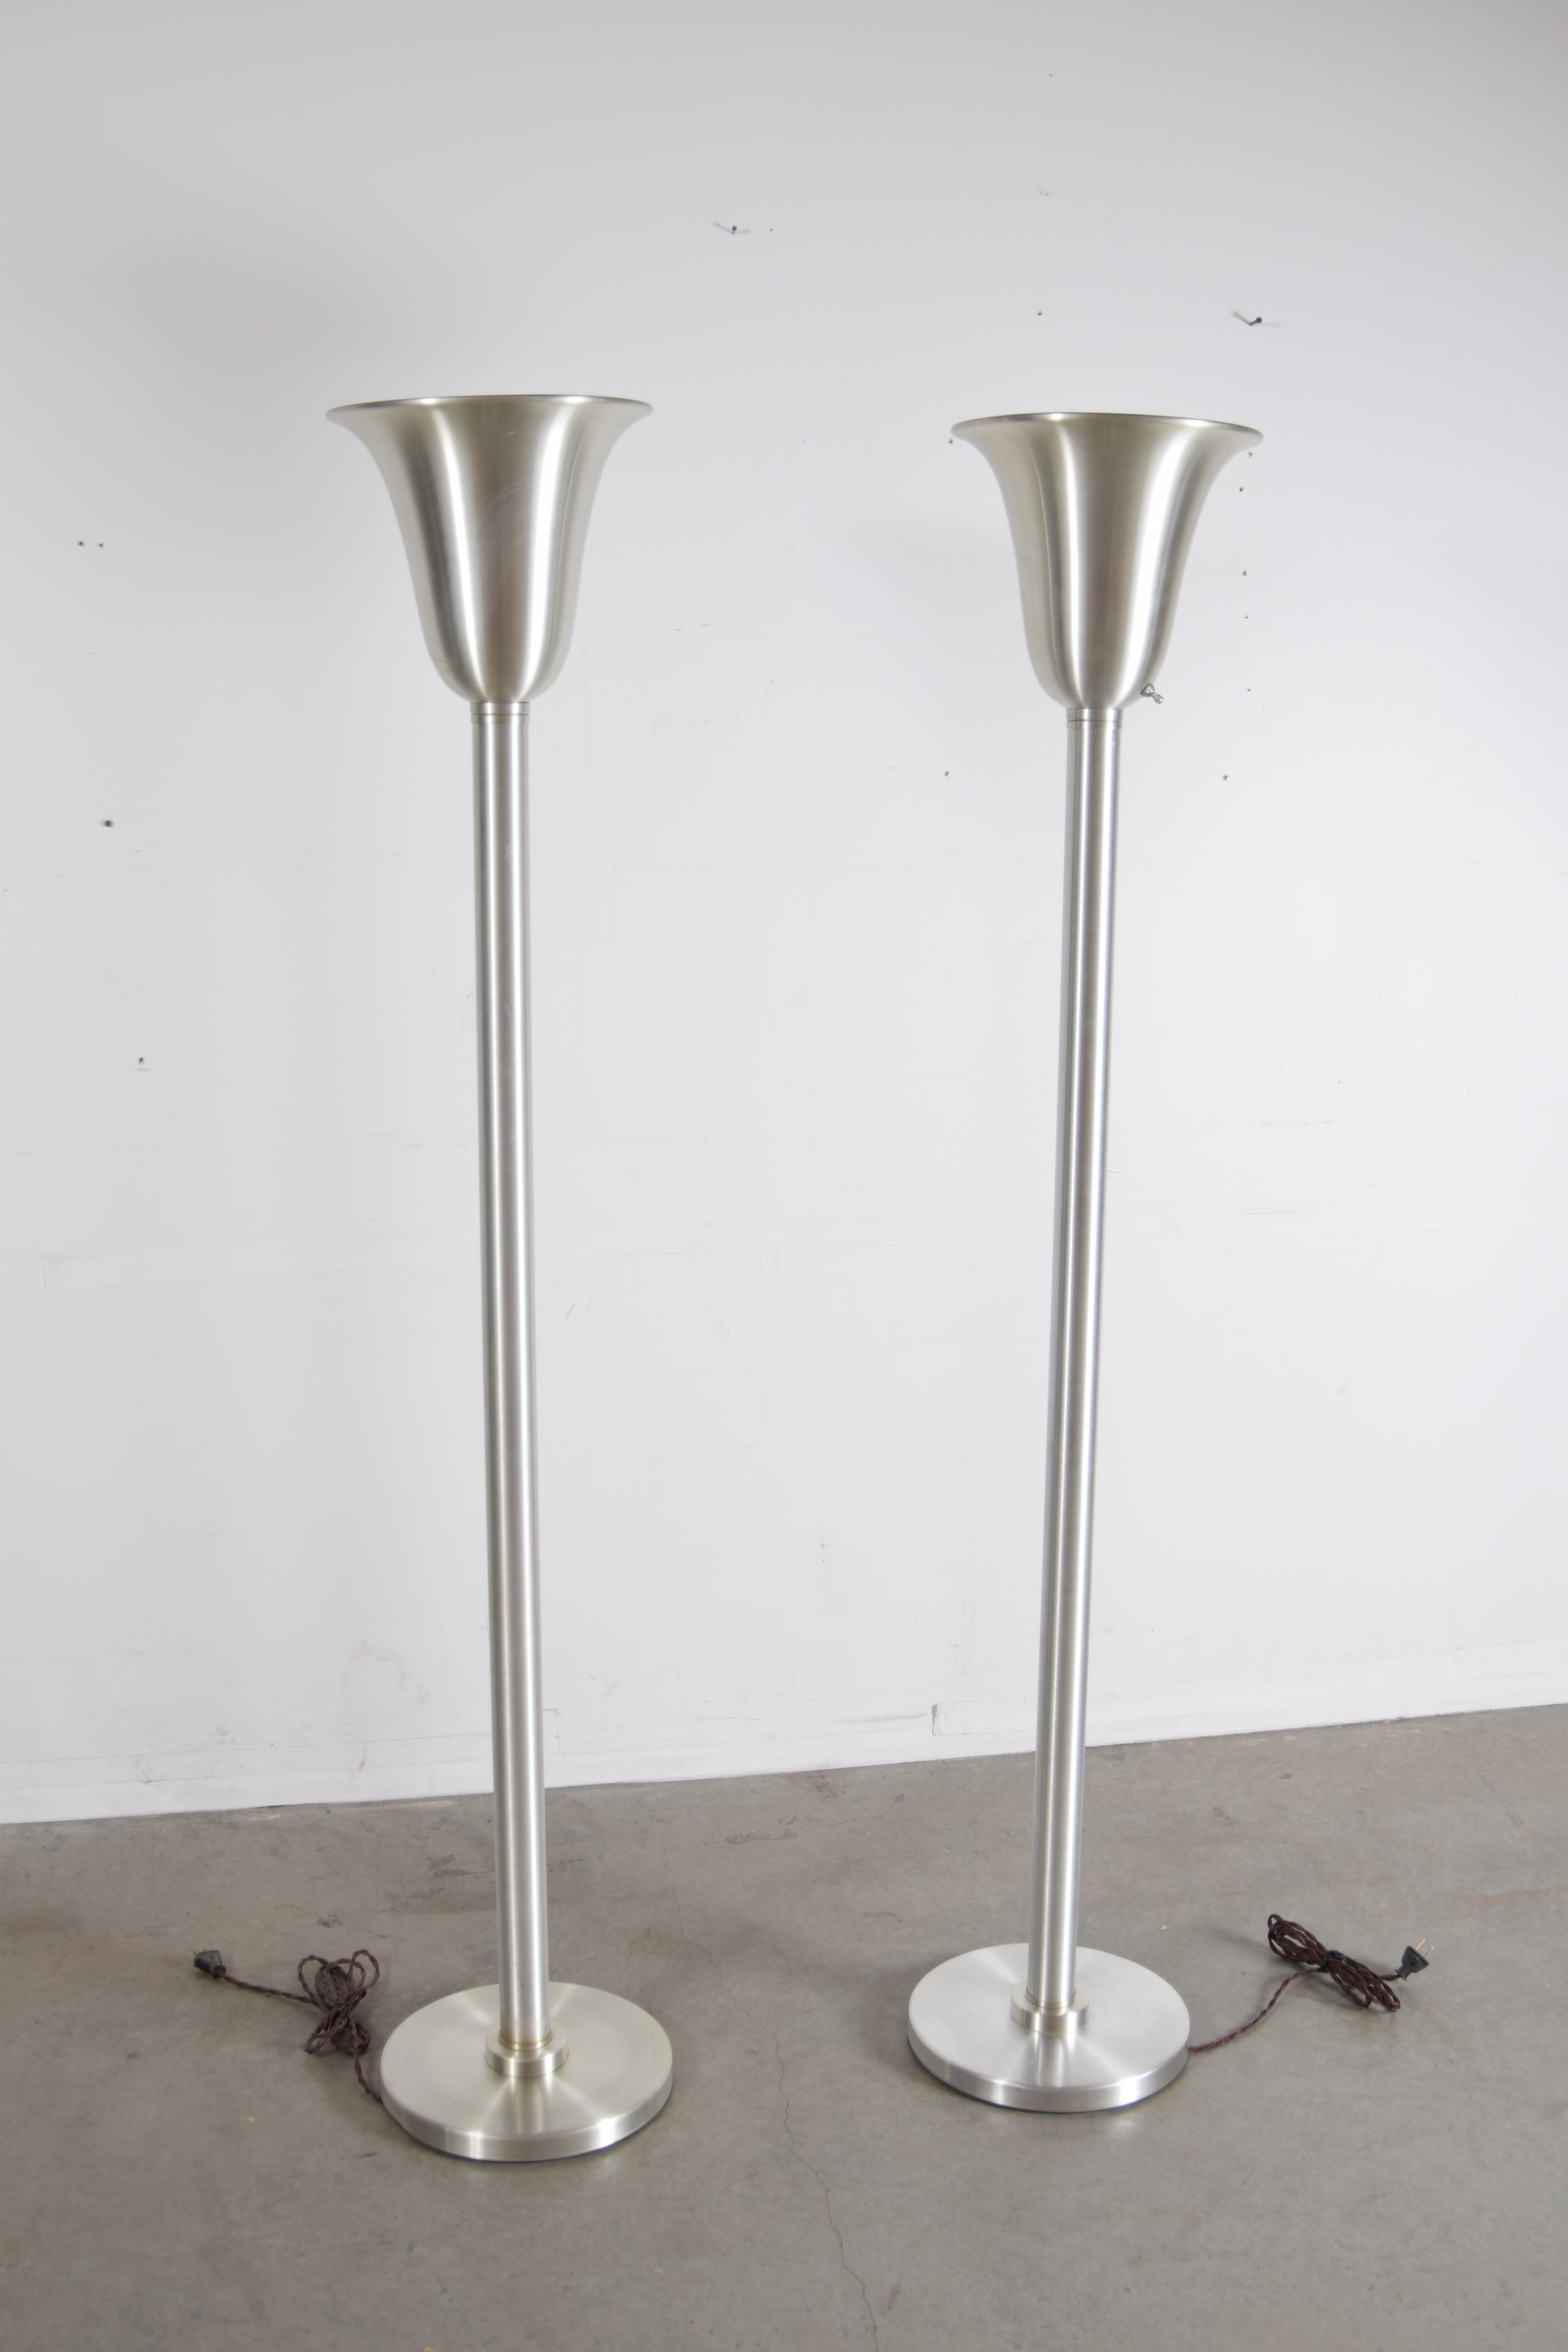 Classic pair of spun aluminum torchieres attributed to Russel Wright, circa 1947. In absolutely amazing condition for their age. Professionally re-wired for safety. They Stand 65